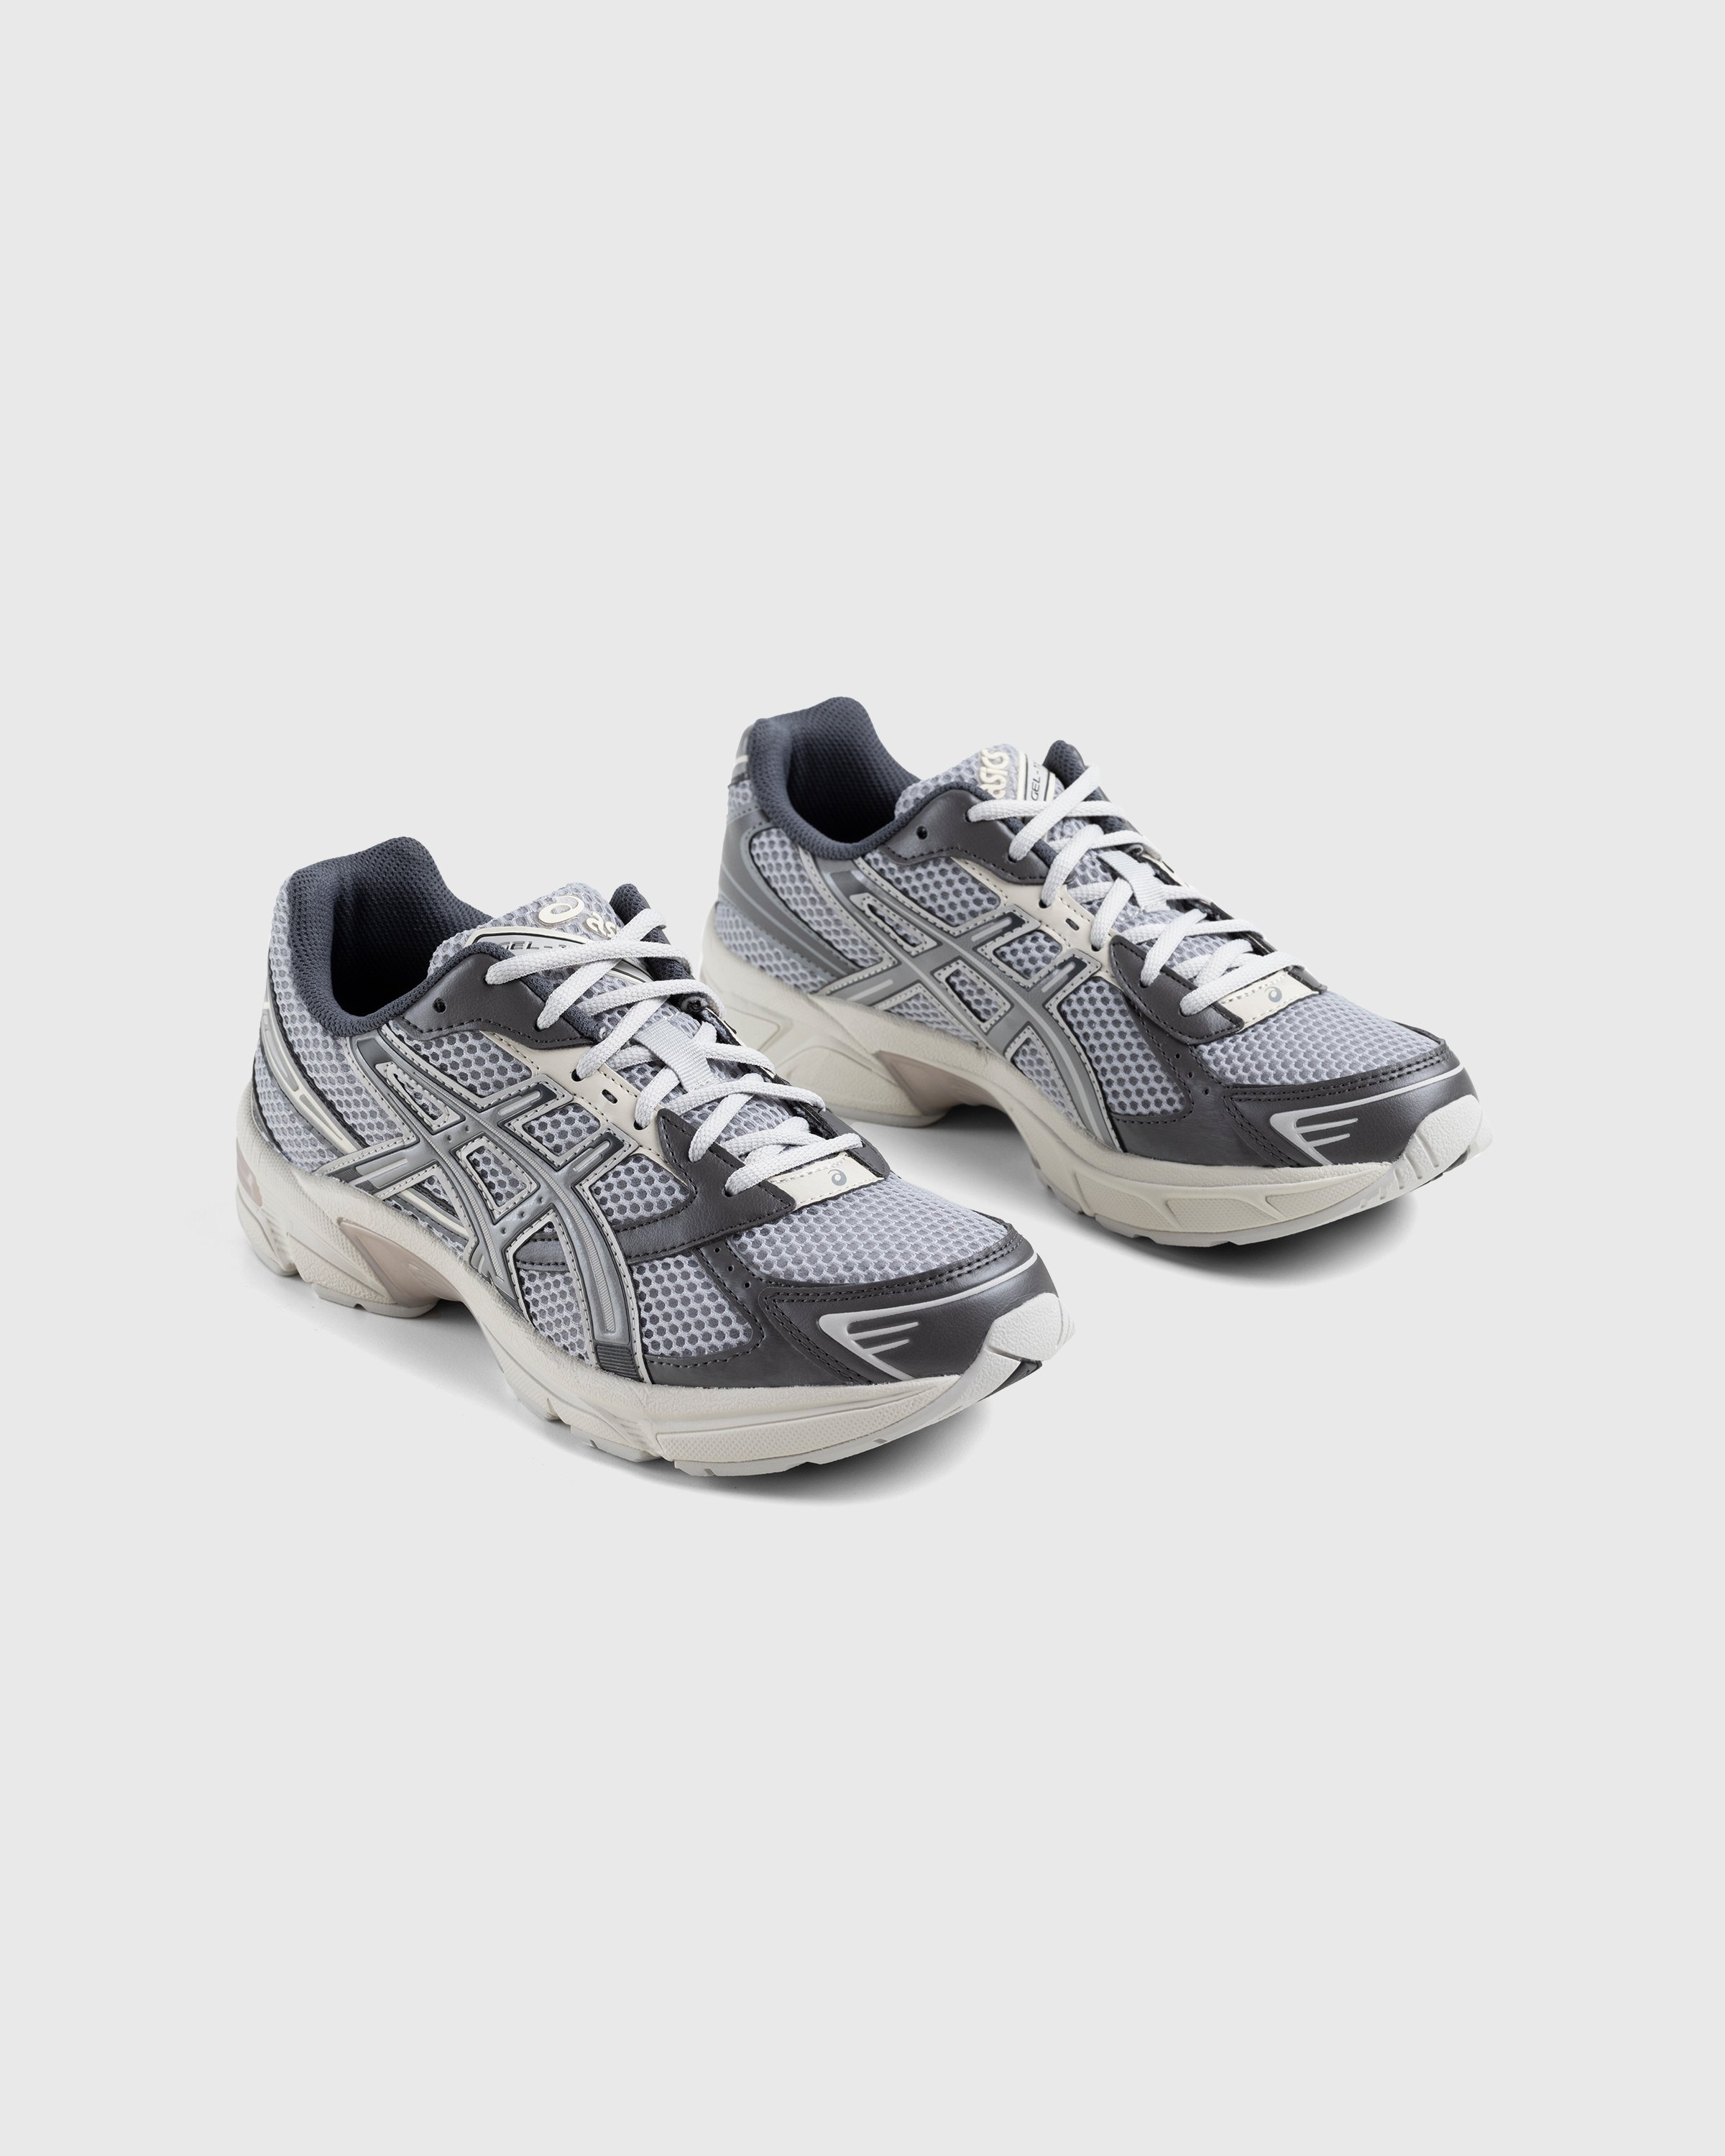 asics – Gel-1130 Oyster Grey/Clay Grey - Sneakers - Grey - Image 2